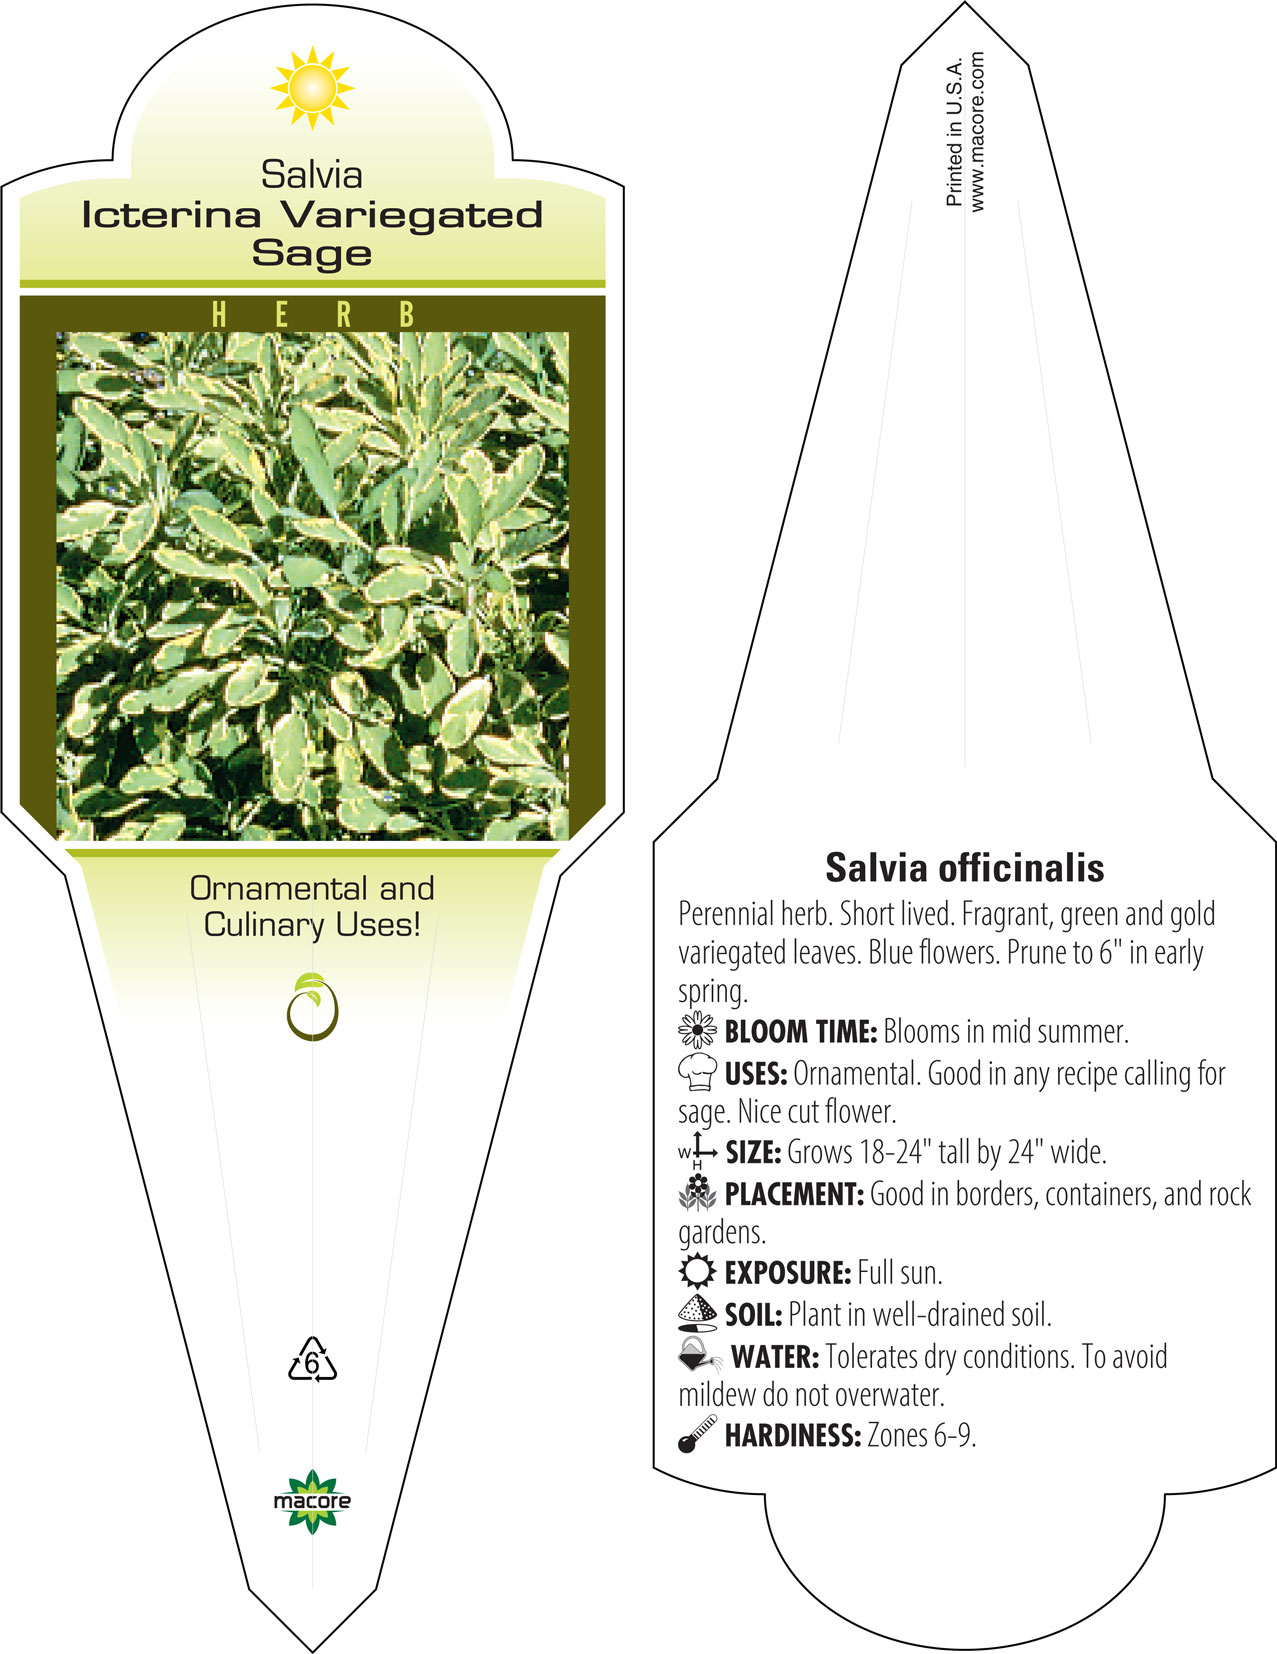 Macore- Stakes, Tags, & Labels for the Horticulture Industry 